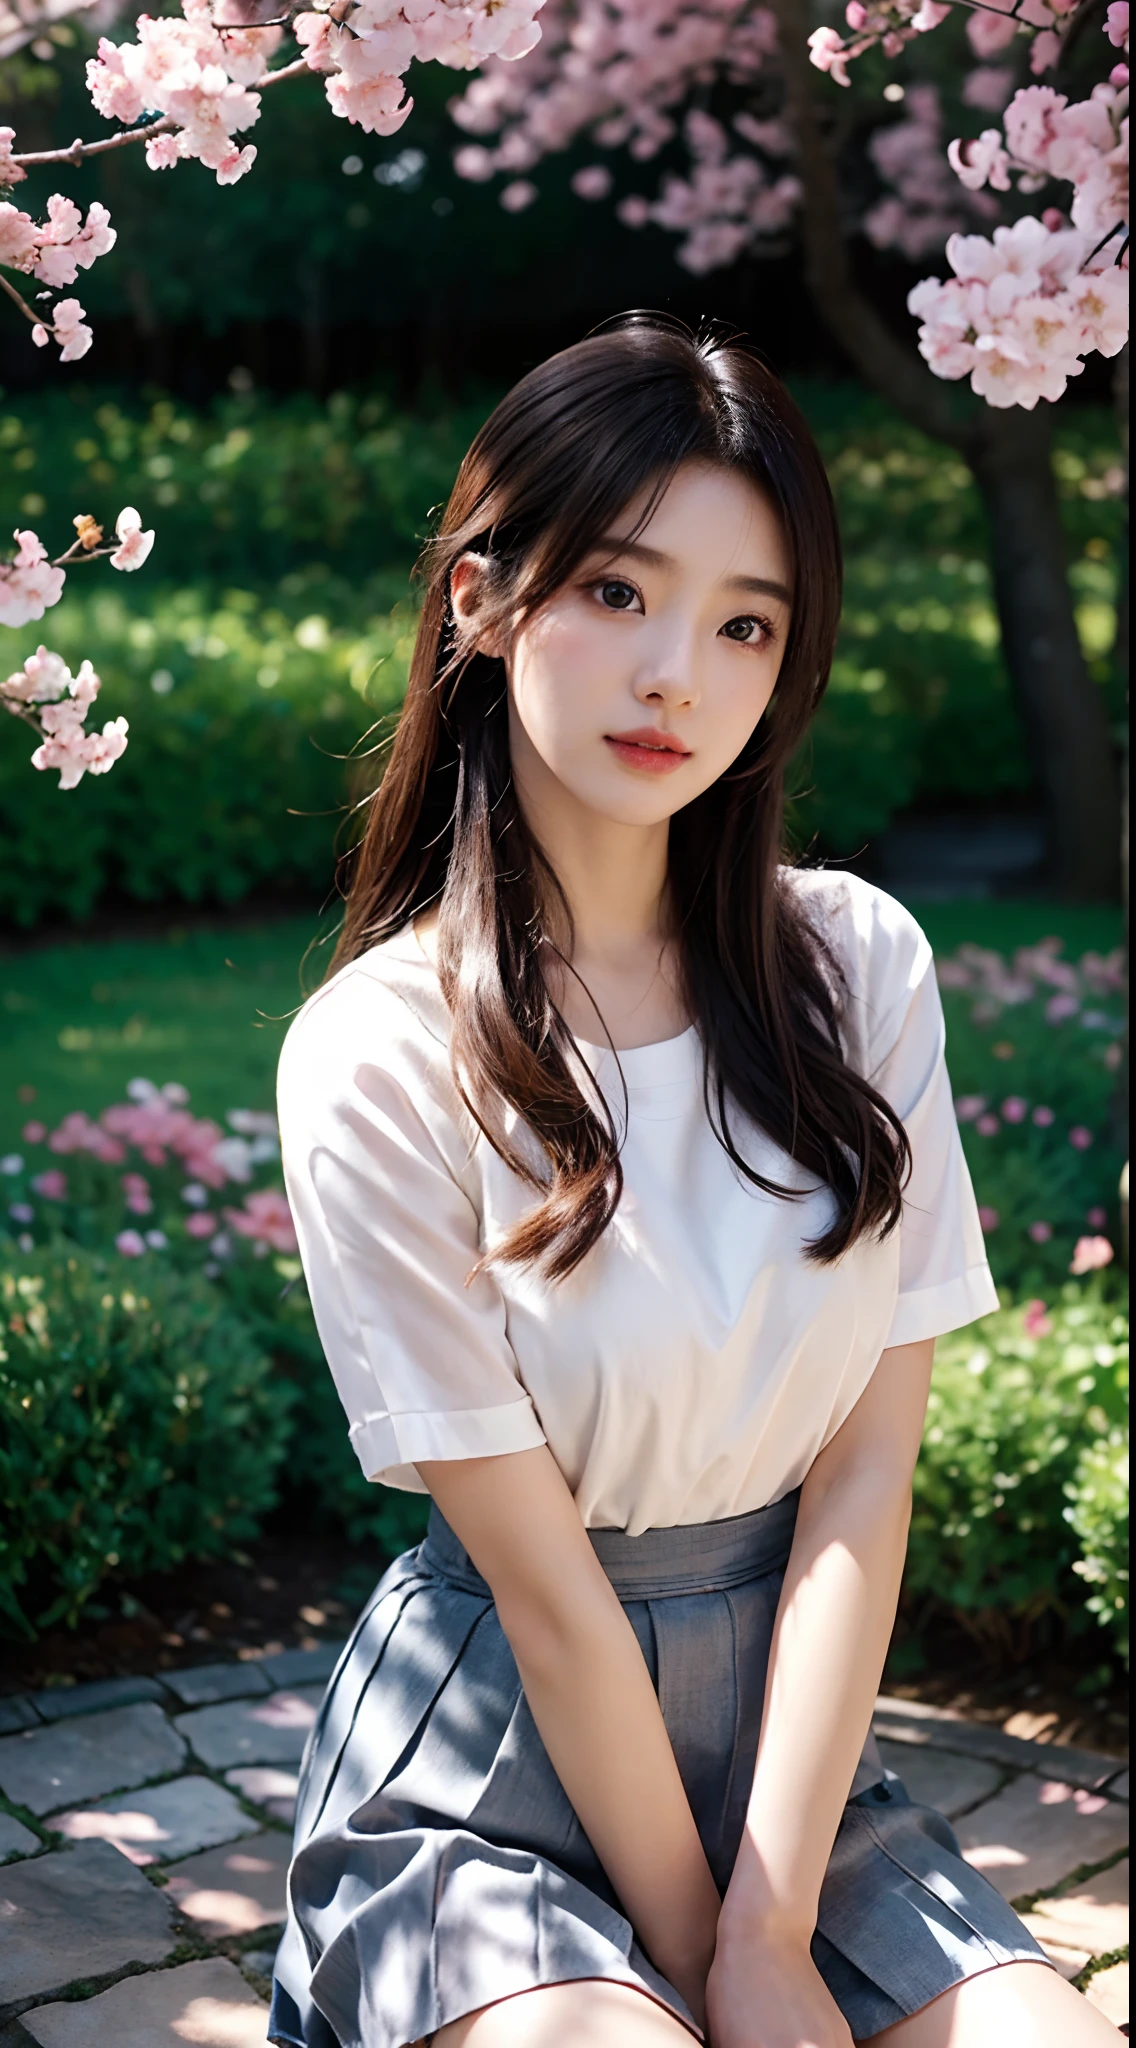 Best quality, 4K,8K,Realistic, Photorealistic, extremely detaile, An extremely delicate and beautiful, RAW photo, Japanese and Korean beauties，South Korean beauties，Wear JK, ，Large breasts，Detailed eyes and lips, Beautiful hair, joyful expressions, Surrounded by cherry blossom trees, It has a kawaii anime style, In a picturesque garden full of sunshine. The artwork is of the best quality, With ultra-detailed features and realistic, Realistic touch. vibrant with colors，The lighting creates a warm atmosphere, Dreamy atmosphere.